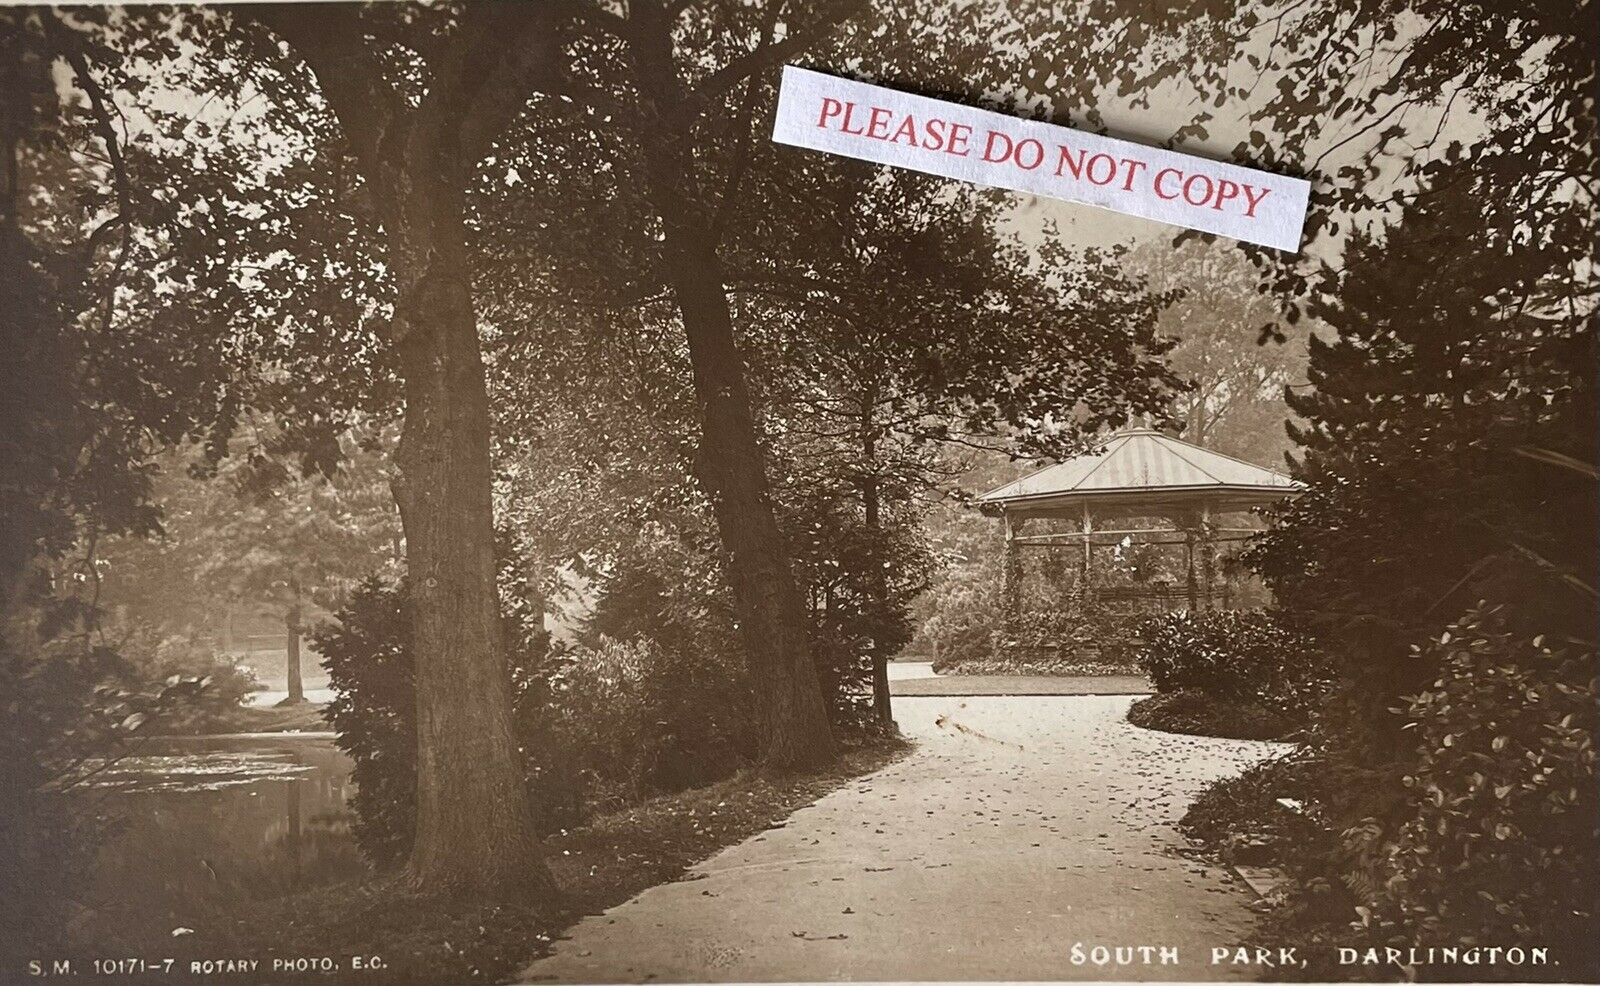 House Clearance - Darlington. South Park & Band Stand. real photo-card. c1950’s unfranked